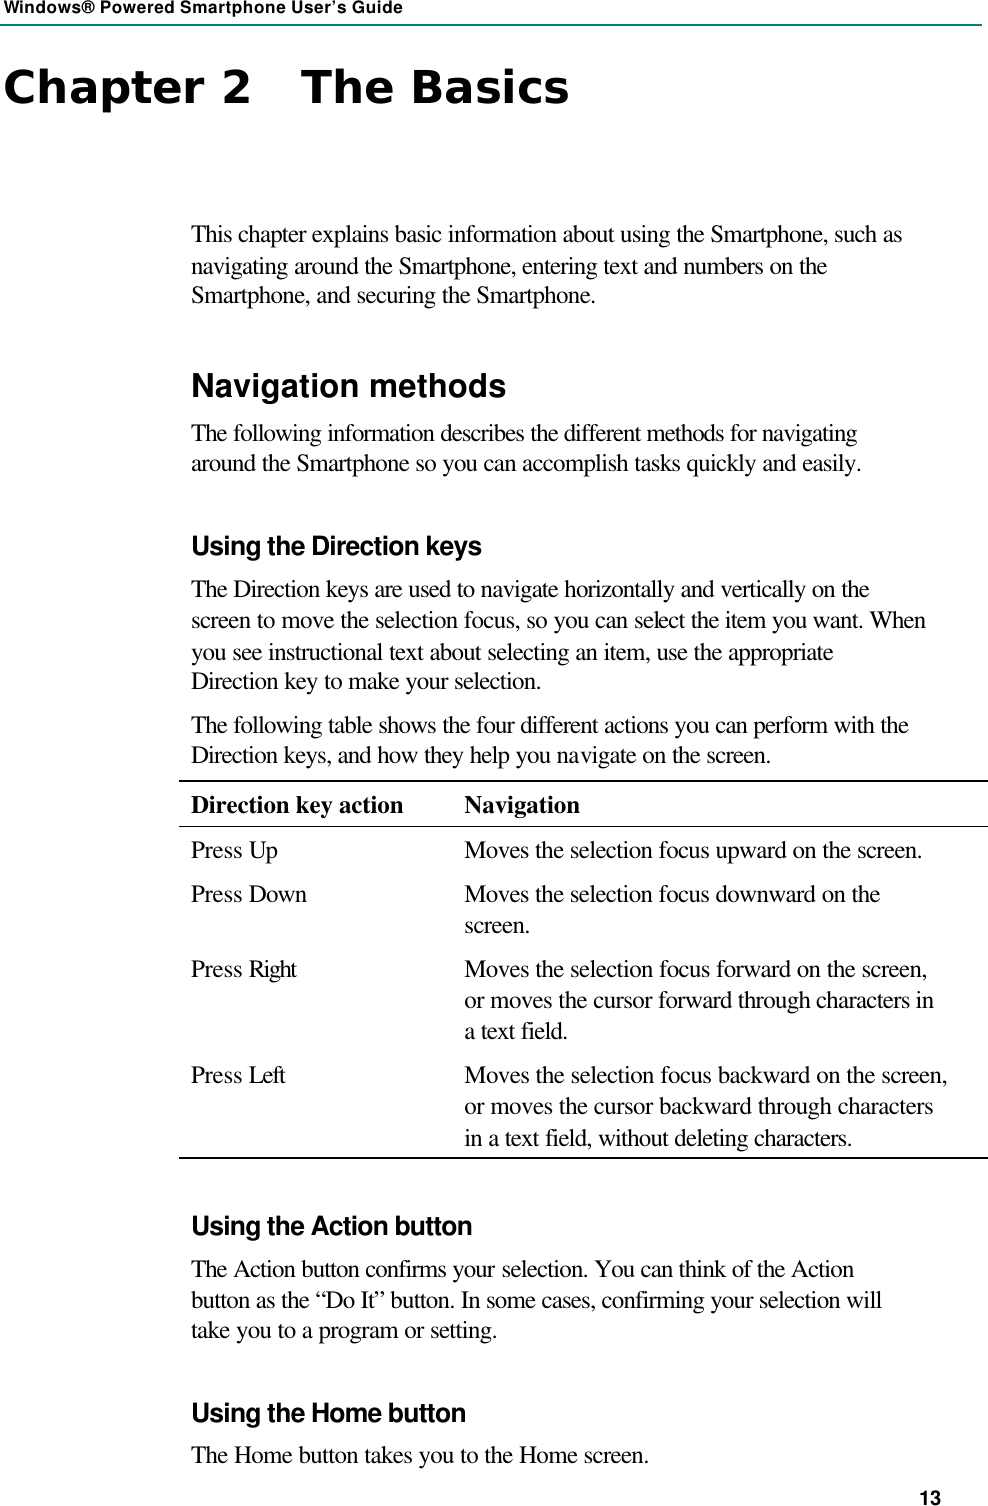 Windows® Powered Smartphone User’s Guide 13 Chapter 2   The Basics This chapter explains basic information about using the Smartphone, such as navigating around the Smartphone, entering text and numbers on the Smartphone, and securing the Smartphone. Navigation methods The following information describes the different methods for navigating around the Smartphone so you can accomplish tasks quickly and easily. Using the Direction keys The Direction keys are used to navigate horizontally and vertically on the screen to move the selection focus, so you can select the item you want. When you see instructional text about selecting an item, use the appropriate Direction key to make your selection. The following table shows the four different actions you can perform with the Direction keys, and how they help you navigate on the screen. Direction key action Navigation Press Up Moves the selection focus upward on the screen. Press Down Moves the selection focus downward on the screen. Press Right Moves the selection focus forward on the screen, or moves the cursor forward through characters in a text field. Press Left Moves the selection focus backward on the screen, or moves the cursor backward through characters in a text field, without deleting characters. Using the Action button The Action button confirms your selection. You can think of the Action button as the “Do It” button. In some cases, confirming your selection will take you to a program or setting. Using the Home button The Home button takes you to the Home screen. 